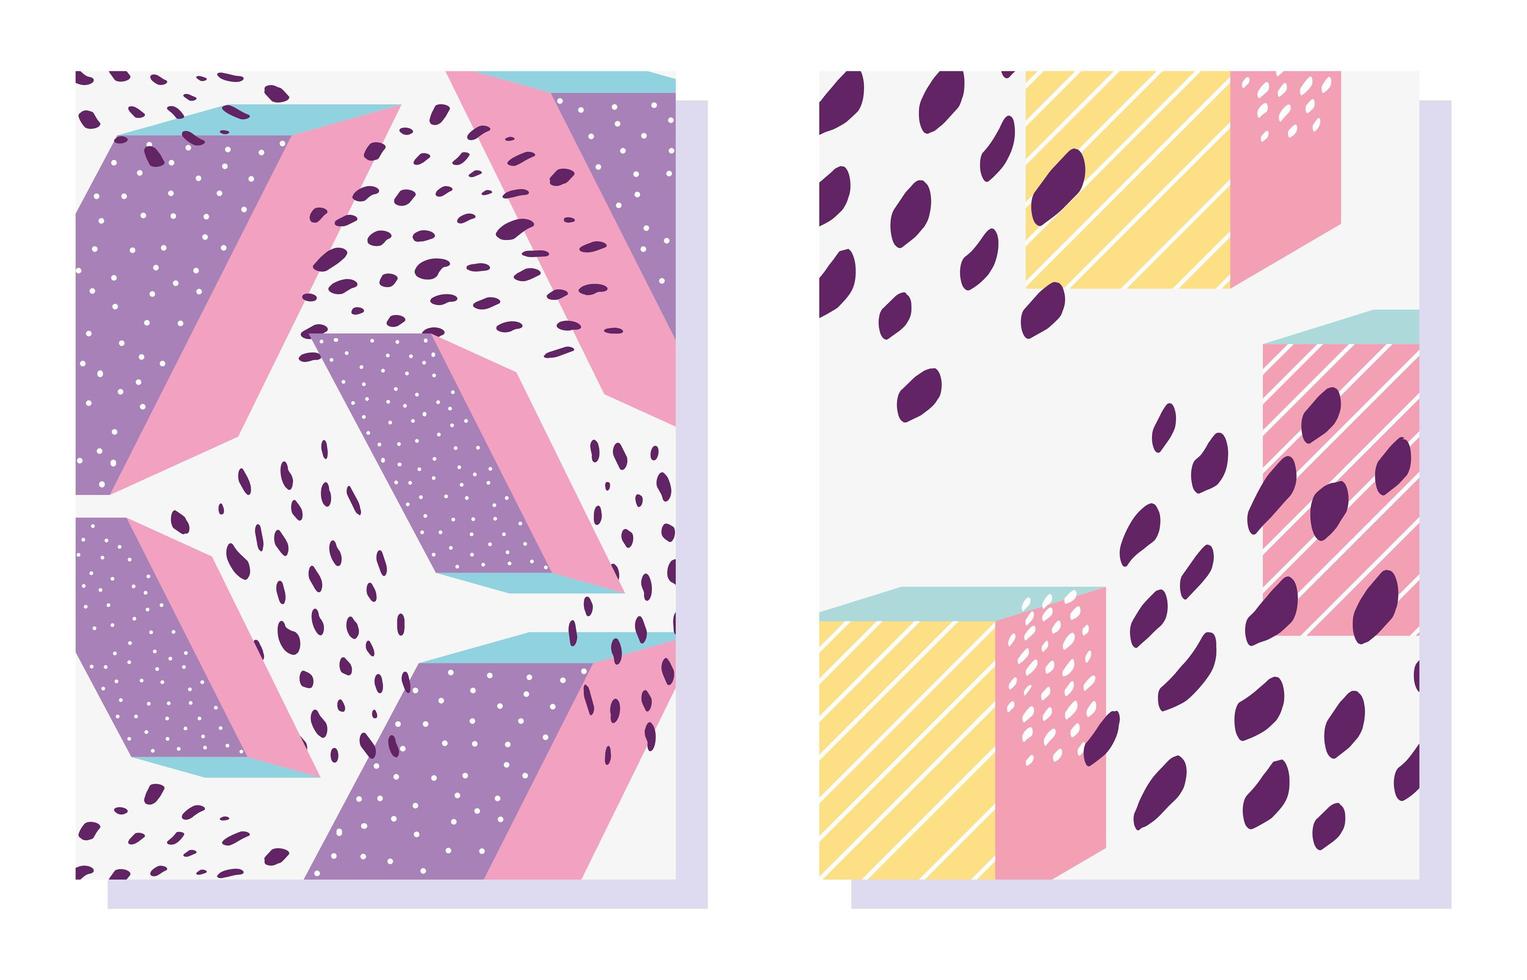 Memphis geometric shapes patterns in 80s trendy fashion  vector